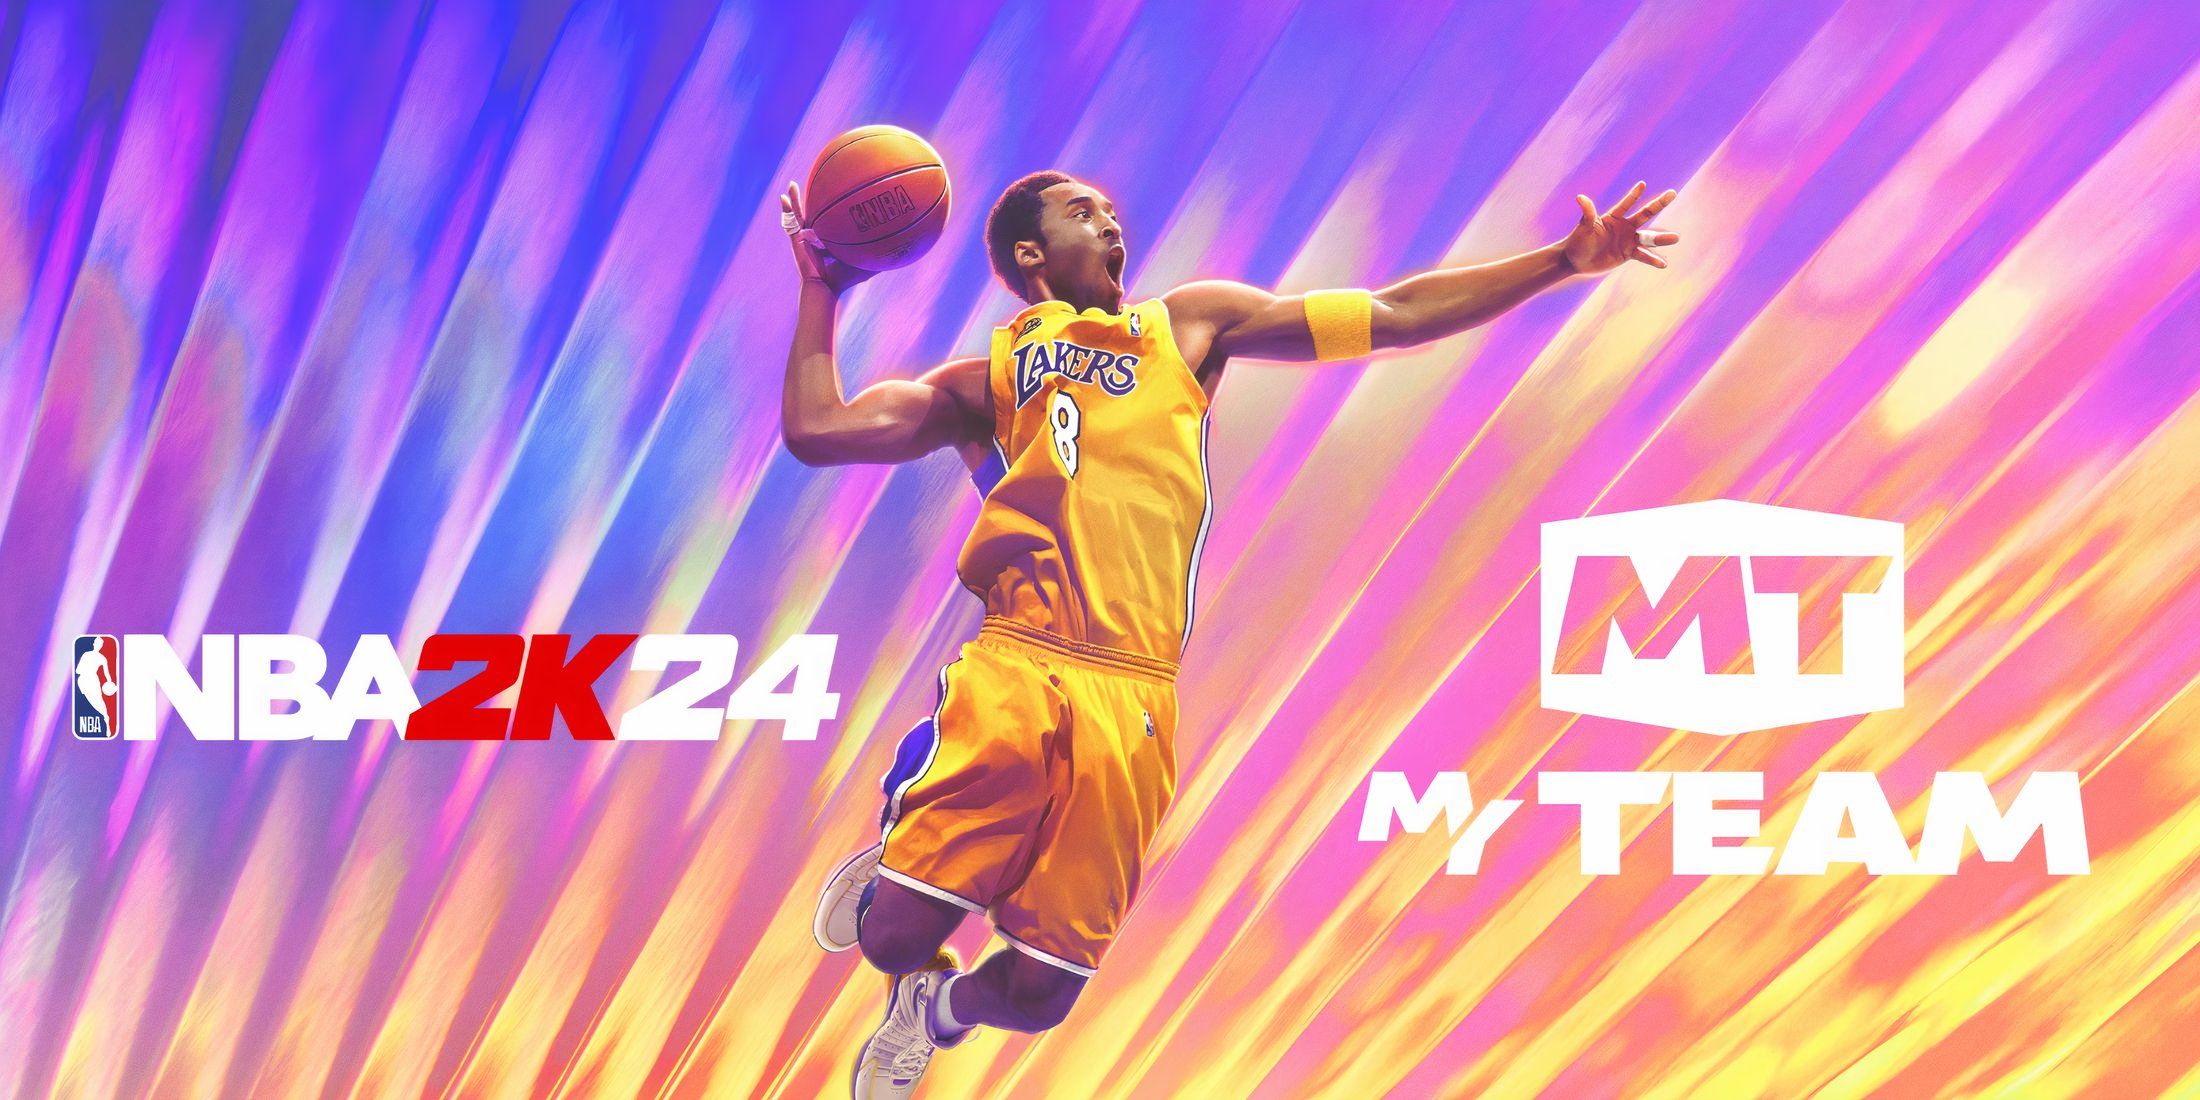 Kobe Bryant performing a dunk with the NBA 2K24 logo